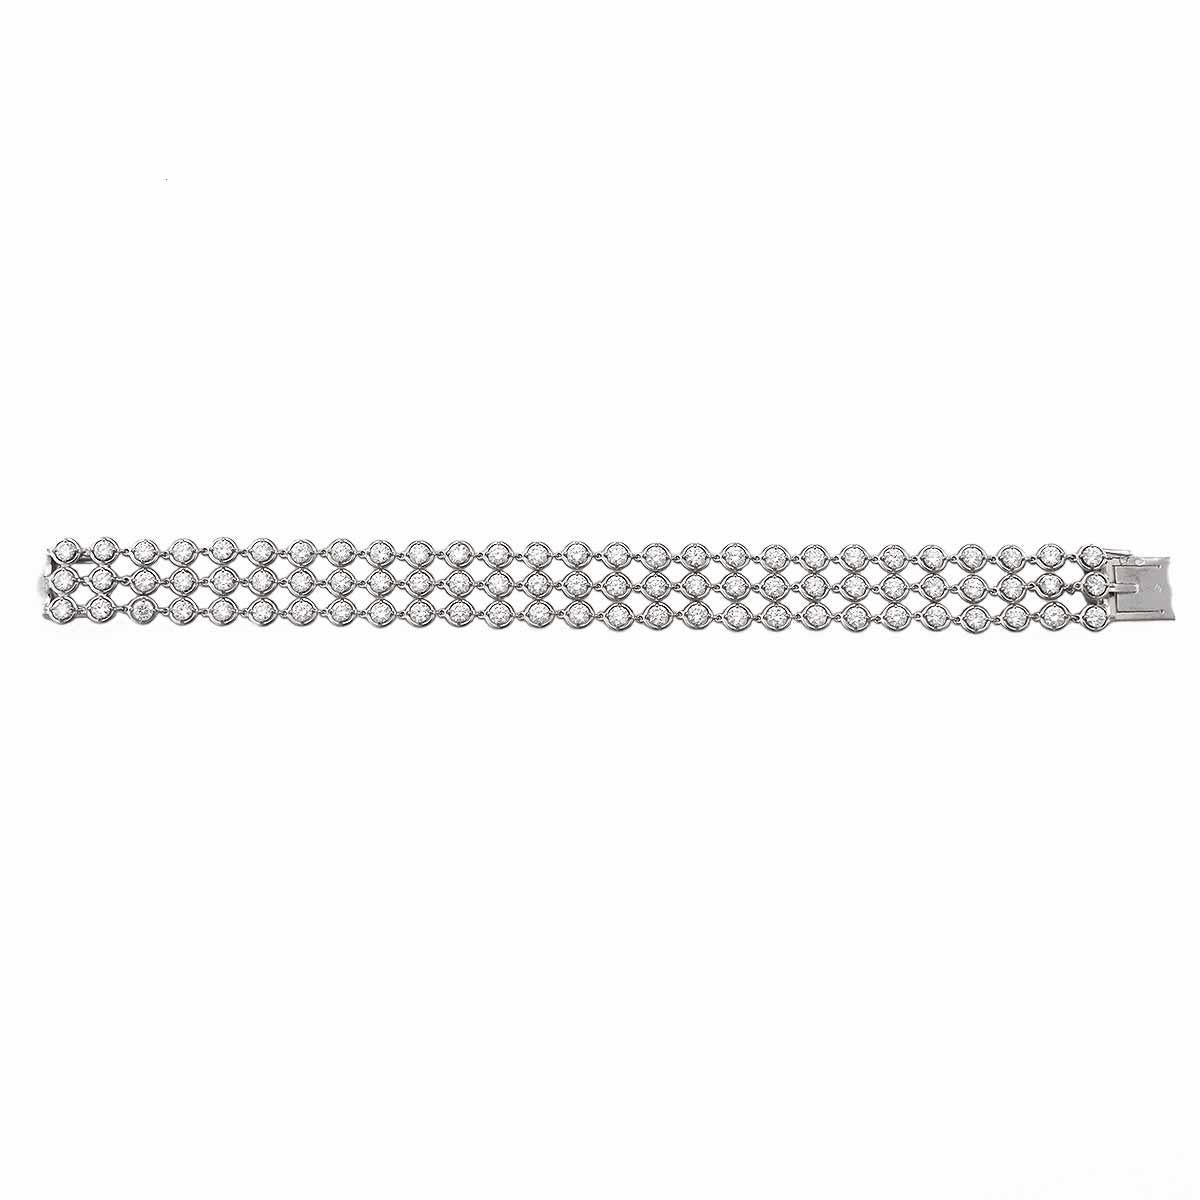 Brand:VanCleef&Arpels
Reference price：JPY13,728,000YEN(included tax)
Name:PALMYRE bracelet
Material :81P diamonds (11.29ct), 750 K18 WG white gold
Band length(inch): 7.67in（Approx)
Weight:24.5g（Approx）
Width(inch) :15mm/ 0.59in（Approx）
Comes with